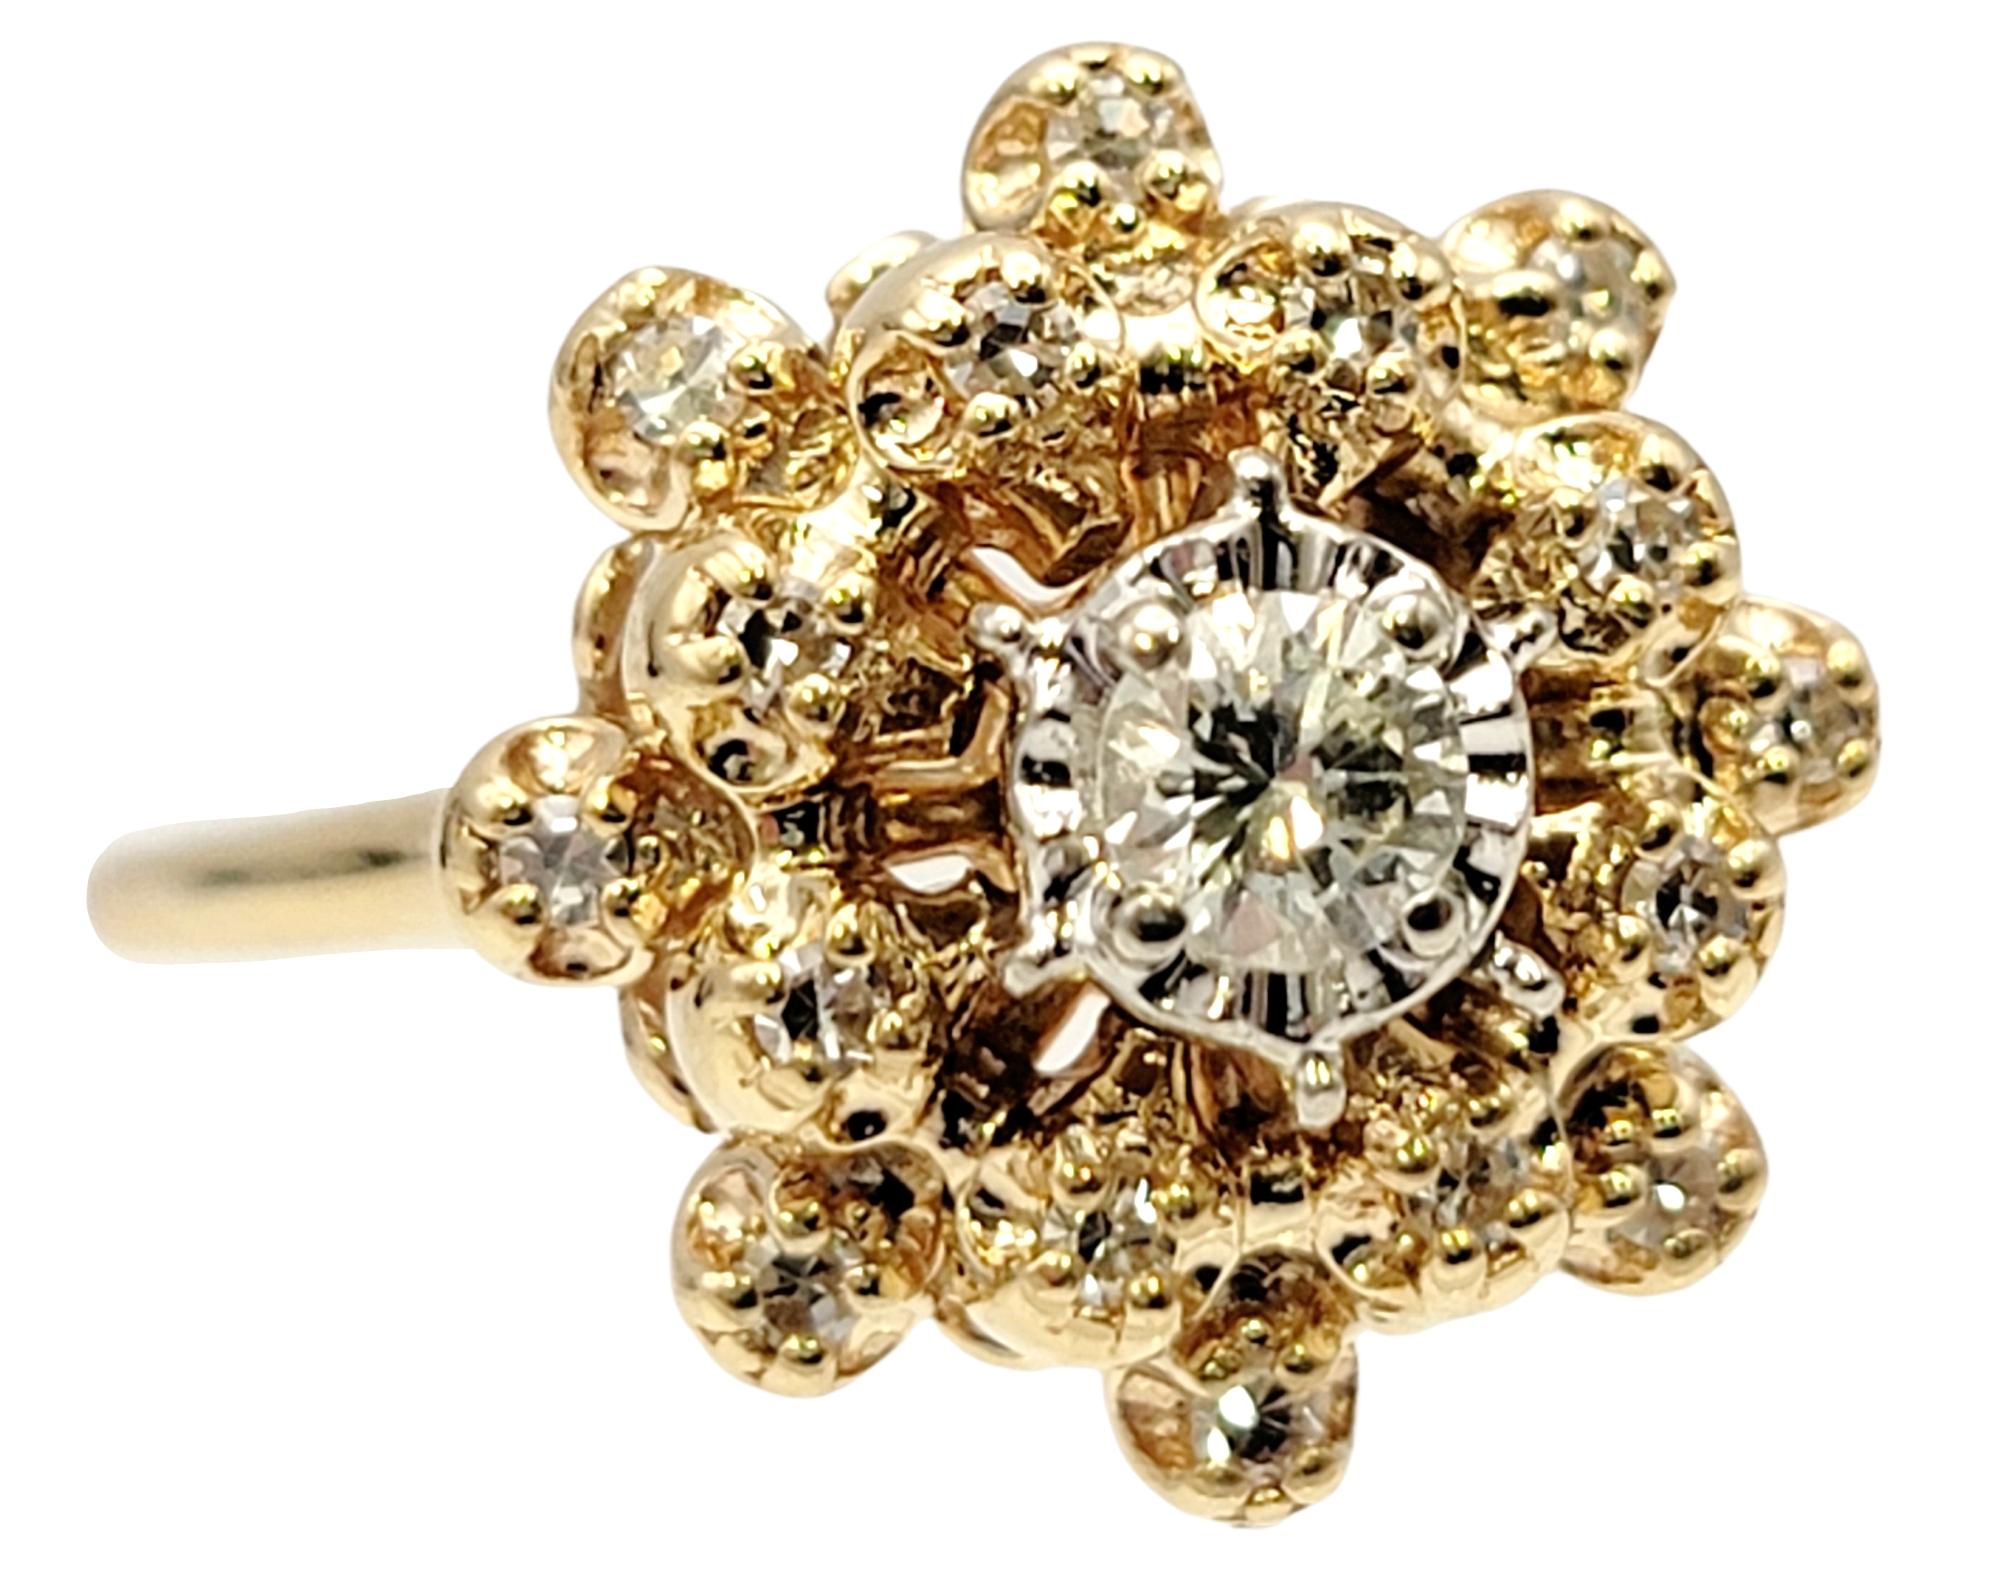 Ring size: 6.25

Lovely vintage diamond dome ring bursting with sparkle! It features 17 round brilliant and single cut diamonds stacked in a rounded dome shape, with the largest stone at the center of the piece. The diamonds are prong set in yellow